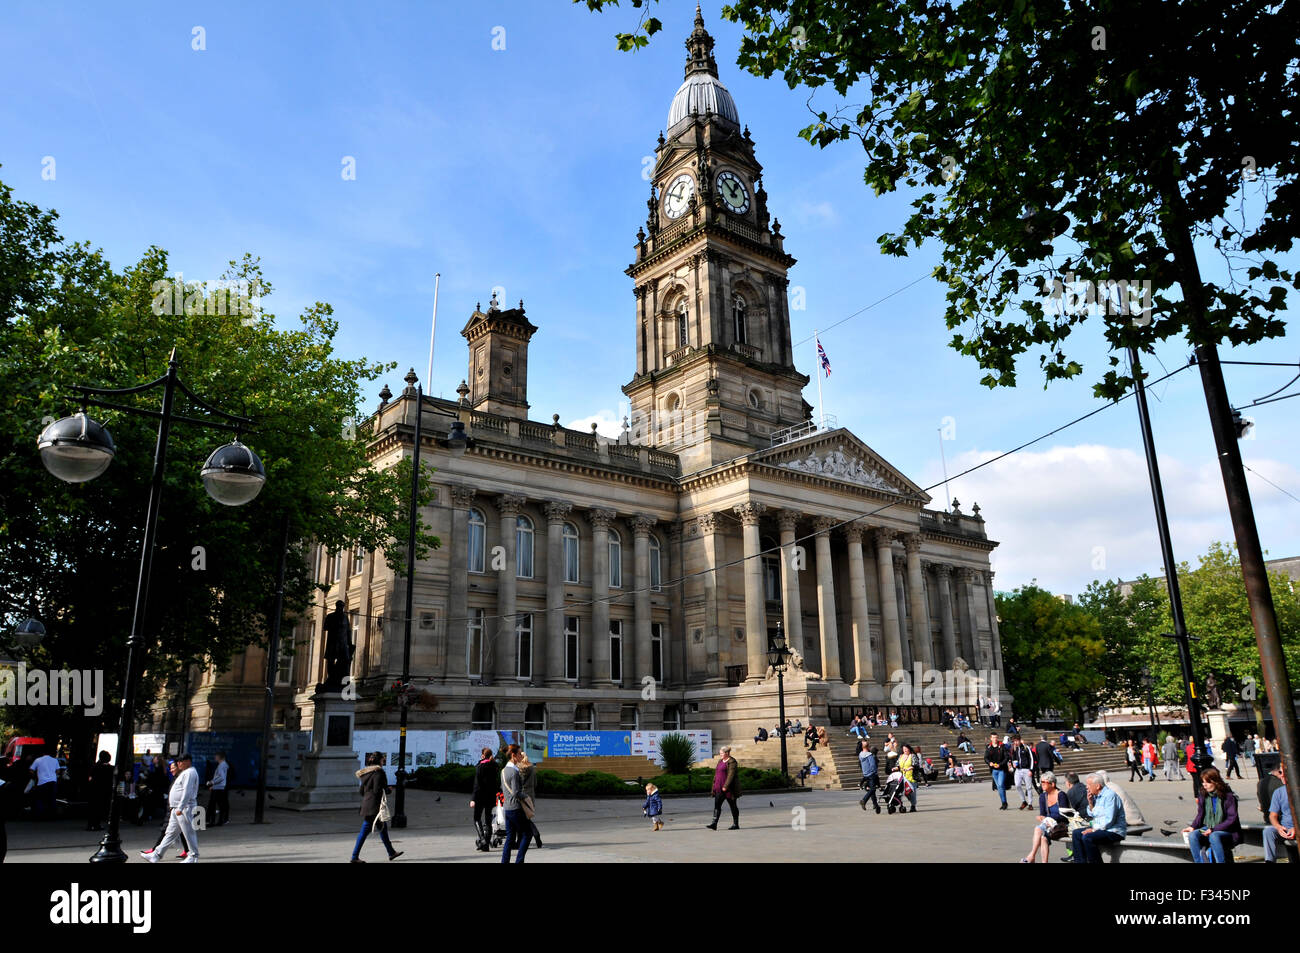 Bolton Town Hall, Victoria Square, Bolton. Picture by Paul Heyes, Tuesday September 29, 2015. Stock Photo